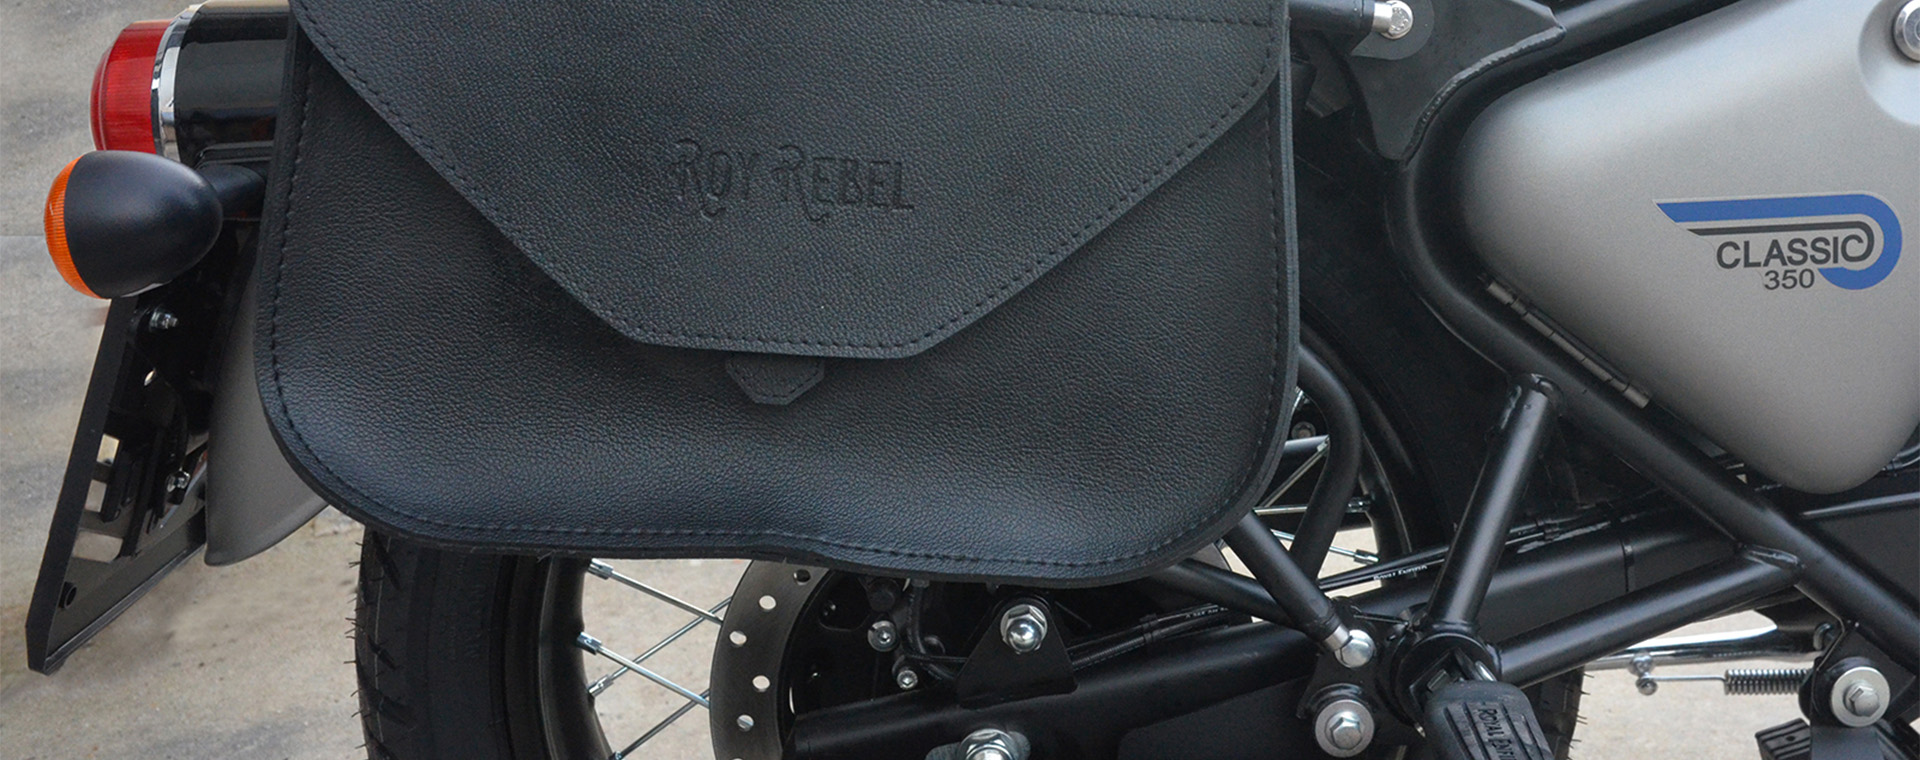 fullsize picture of a motorcycle bag by Roy Rebel with FIDLOCK fasteners